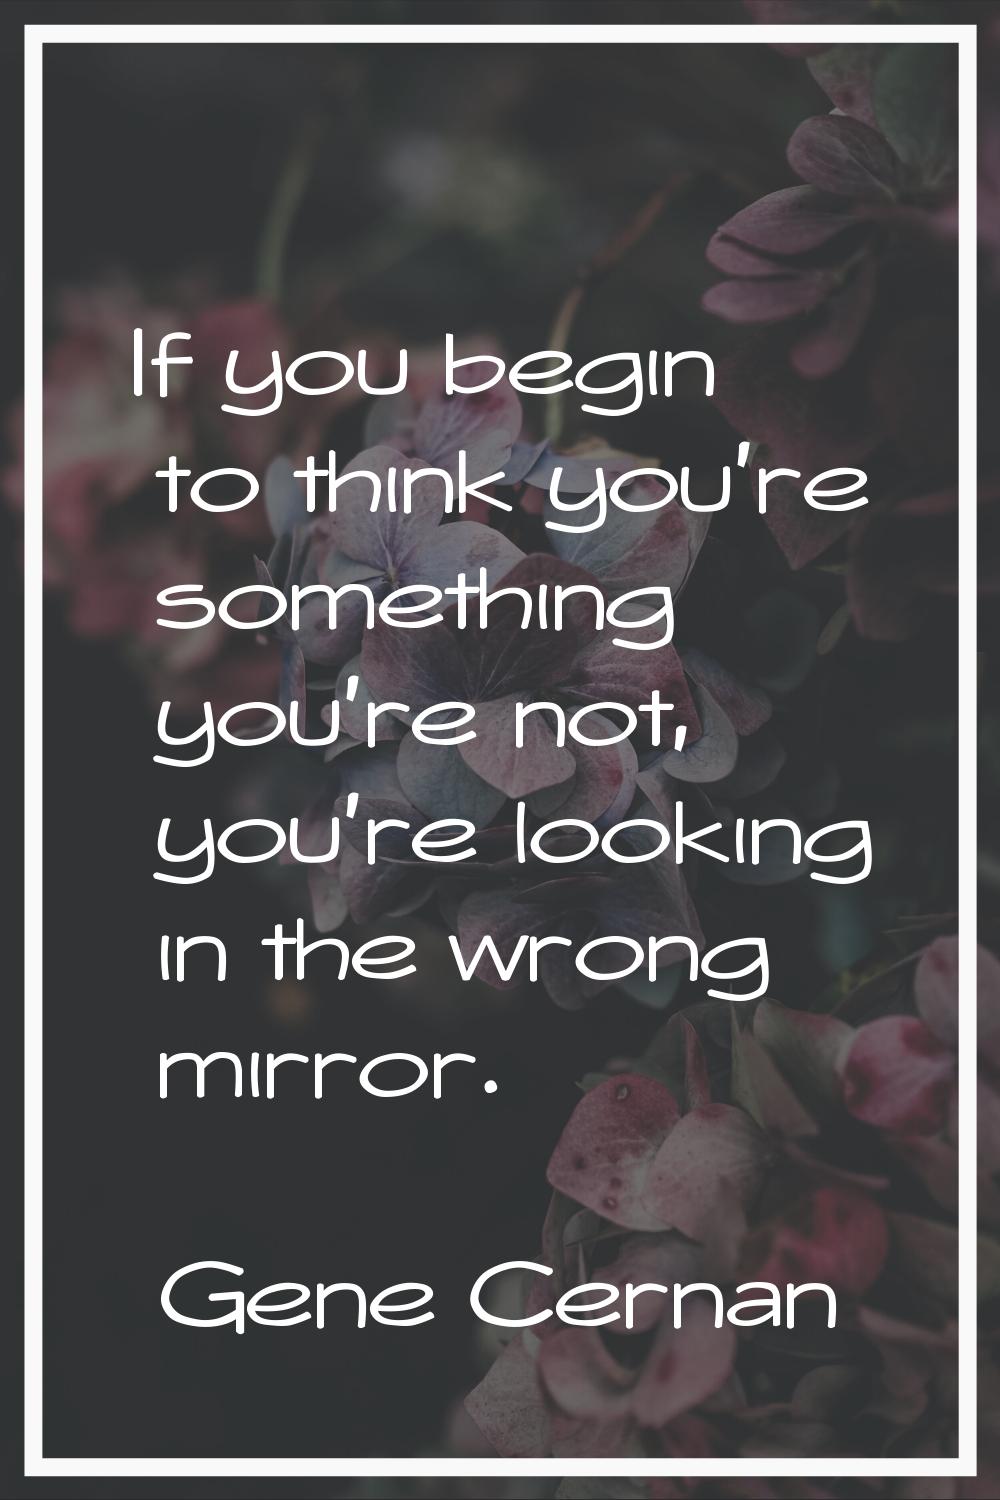 If you begin to think you're something you're not, you're looking in the wrong mirror.